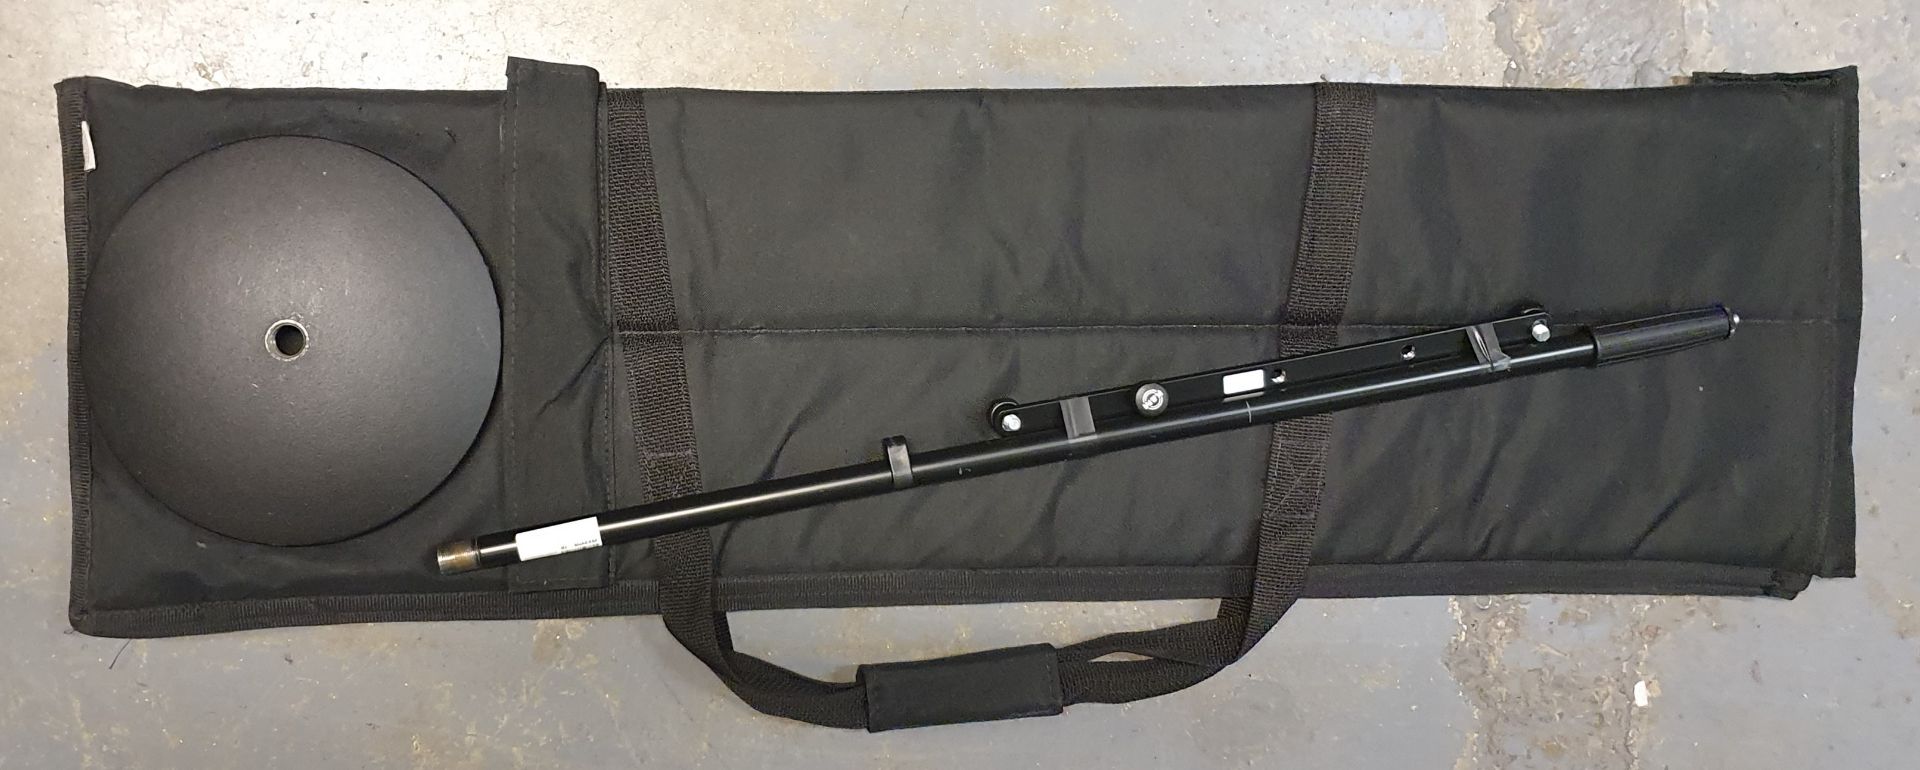 A Black Microphone Stand comprising: base, pole, t-bar with carry bag. - Image 2 of 2